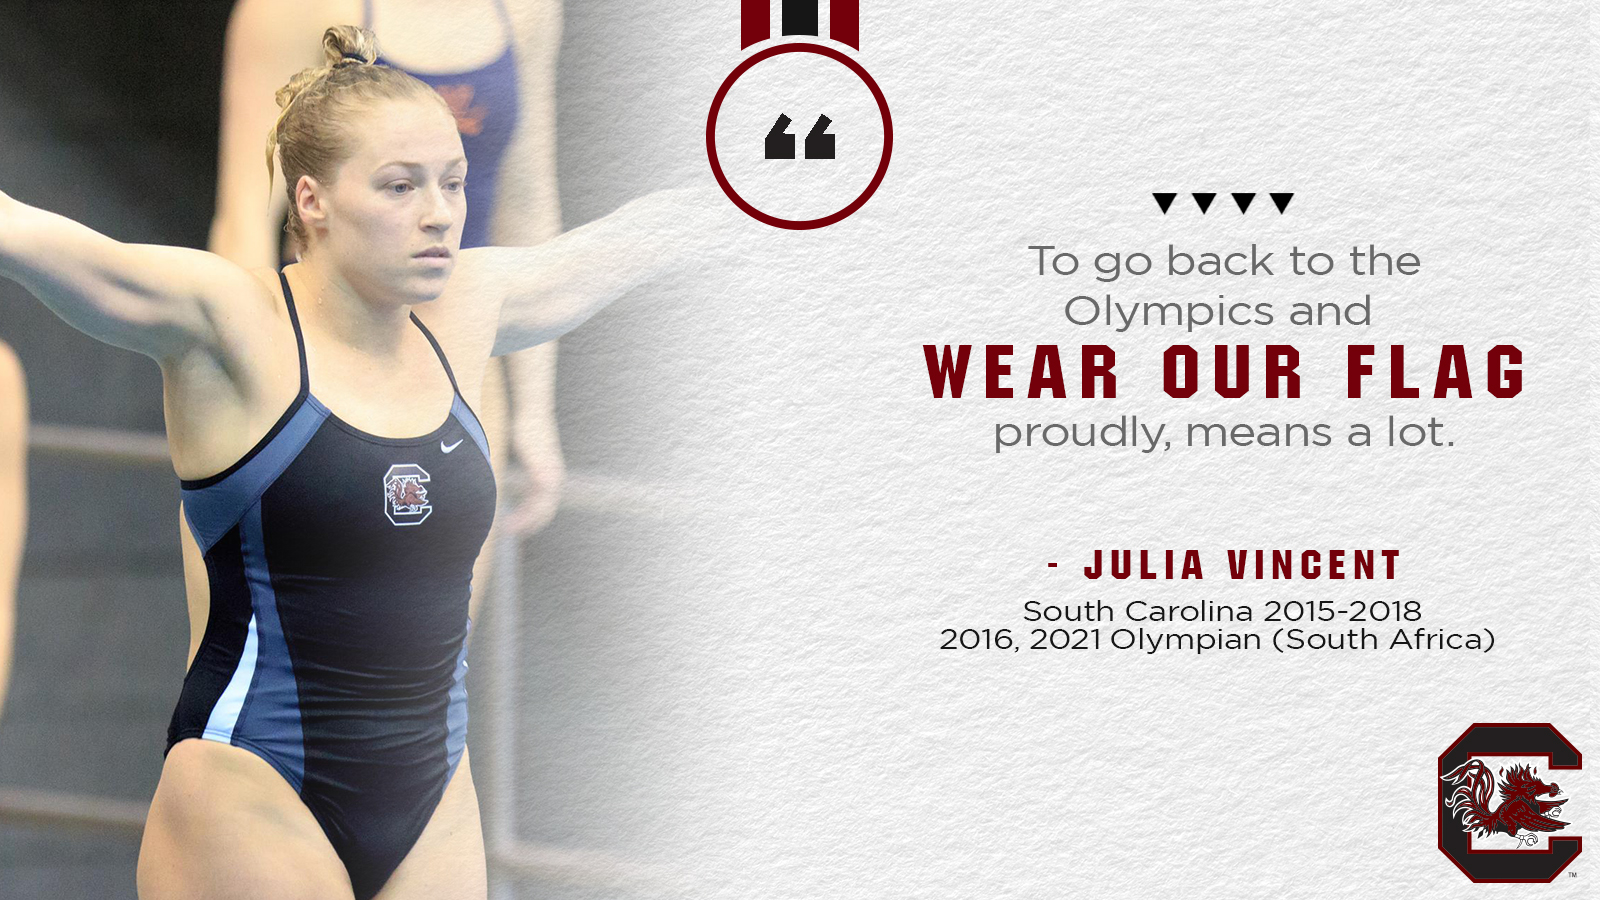 Julia Vincent Looks to Make History in Her Second Olympics Appearance